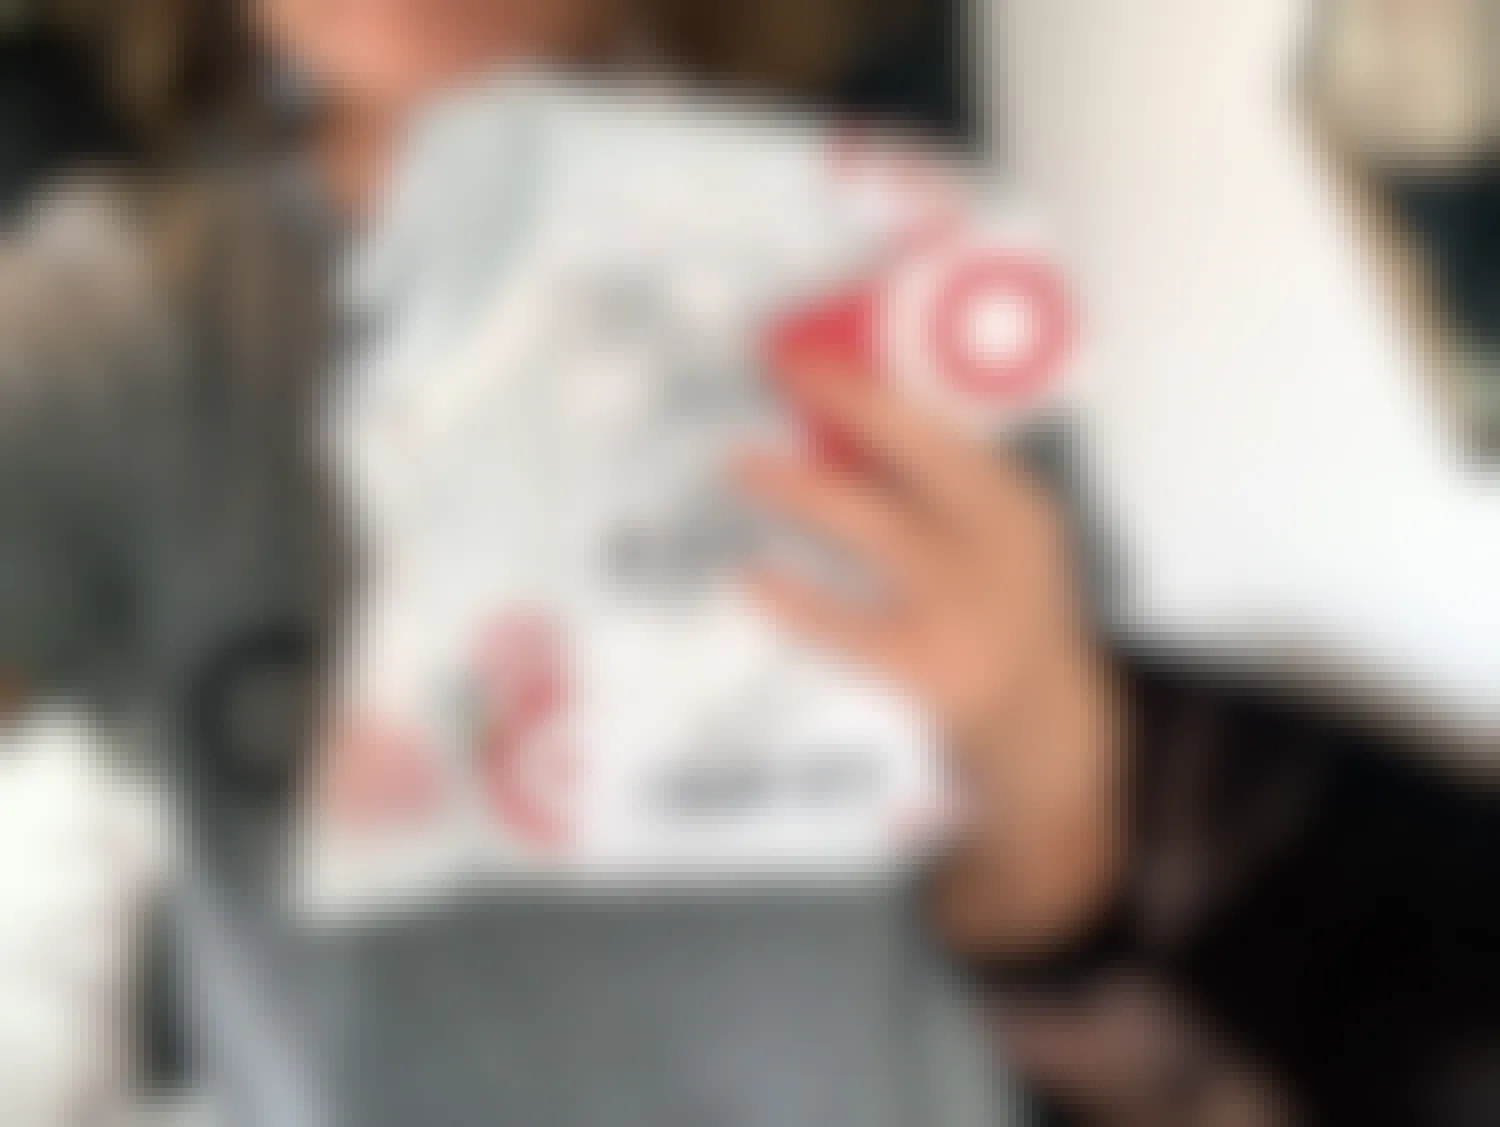 a person holding a package from target that they received in the mail with their target red card